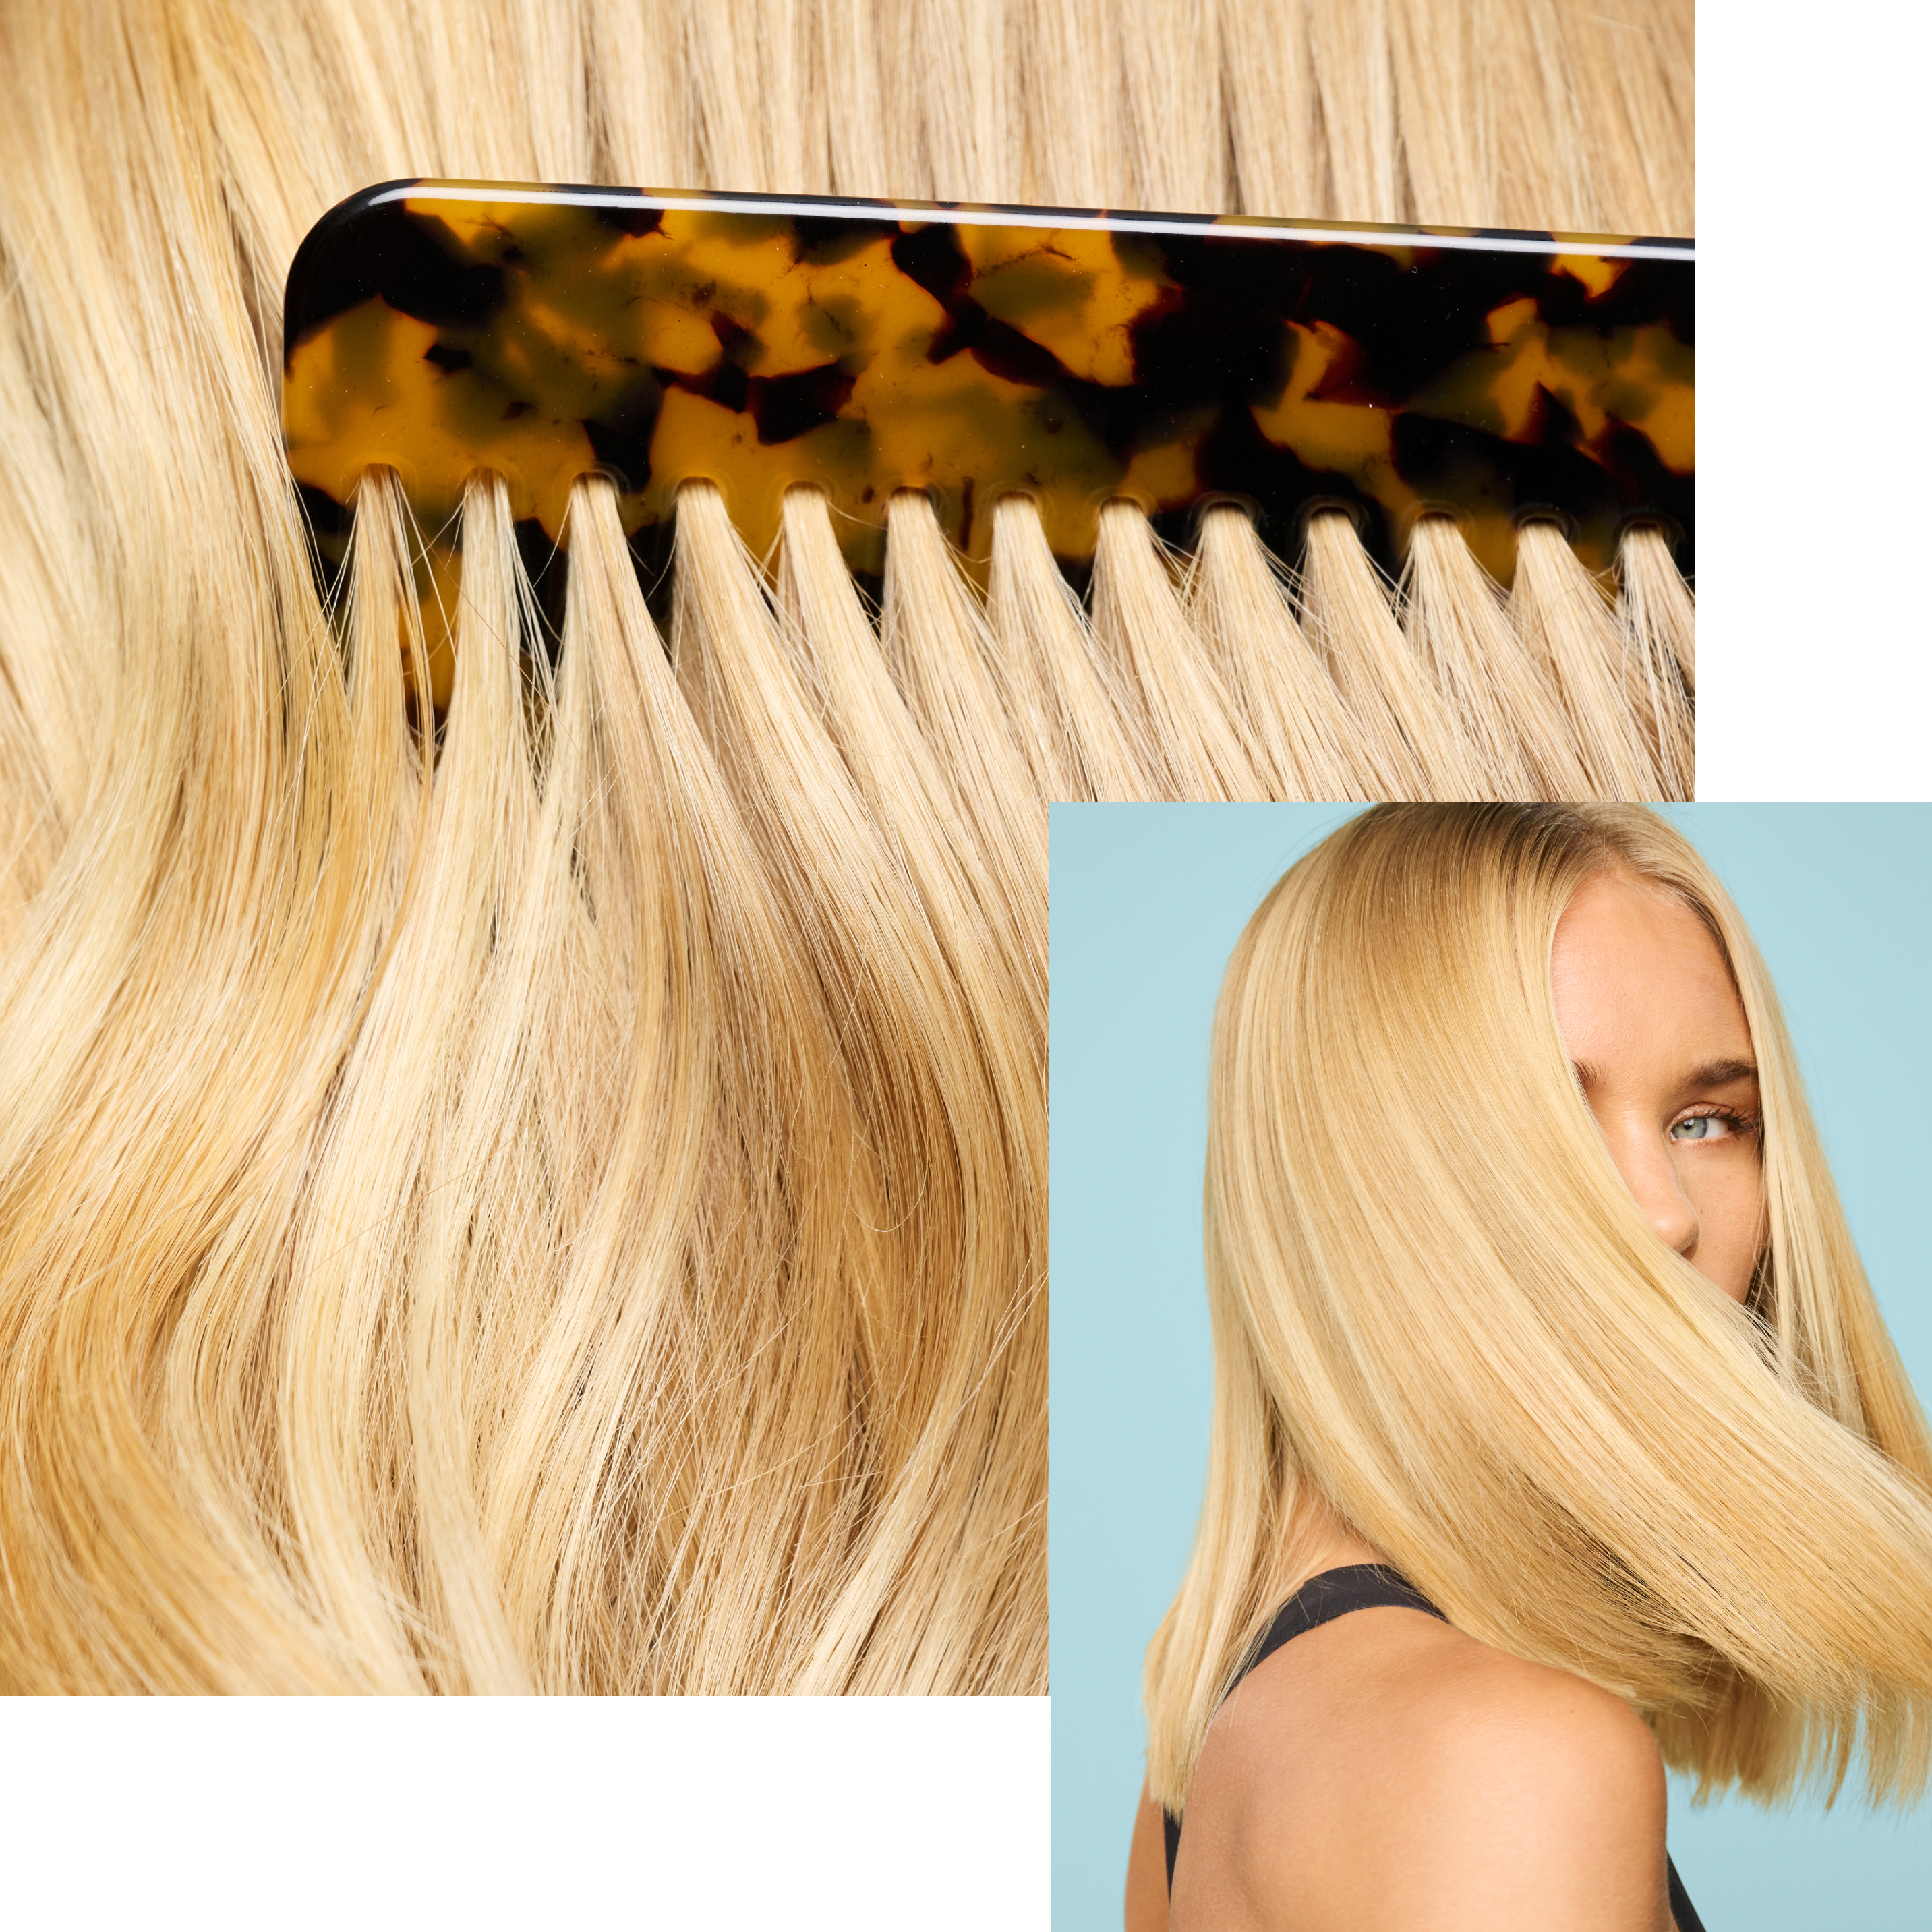 A collage of photos, one of which has a comb running through shiny blonde hair, and the other photo features a model with her hair waving around.